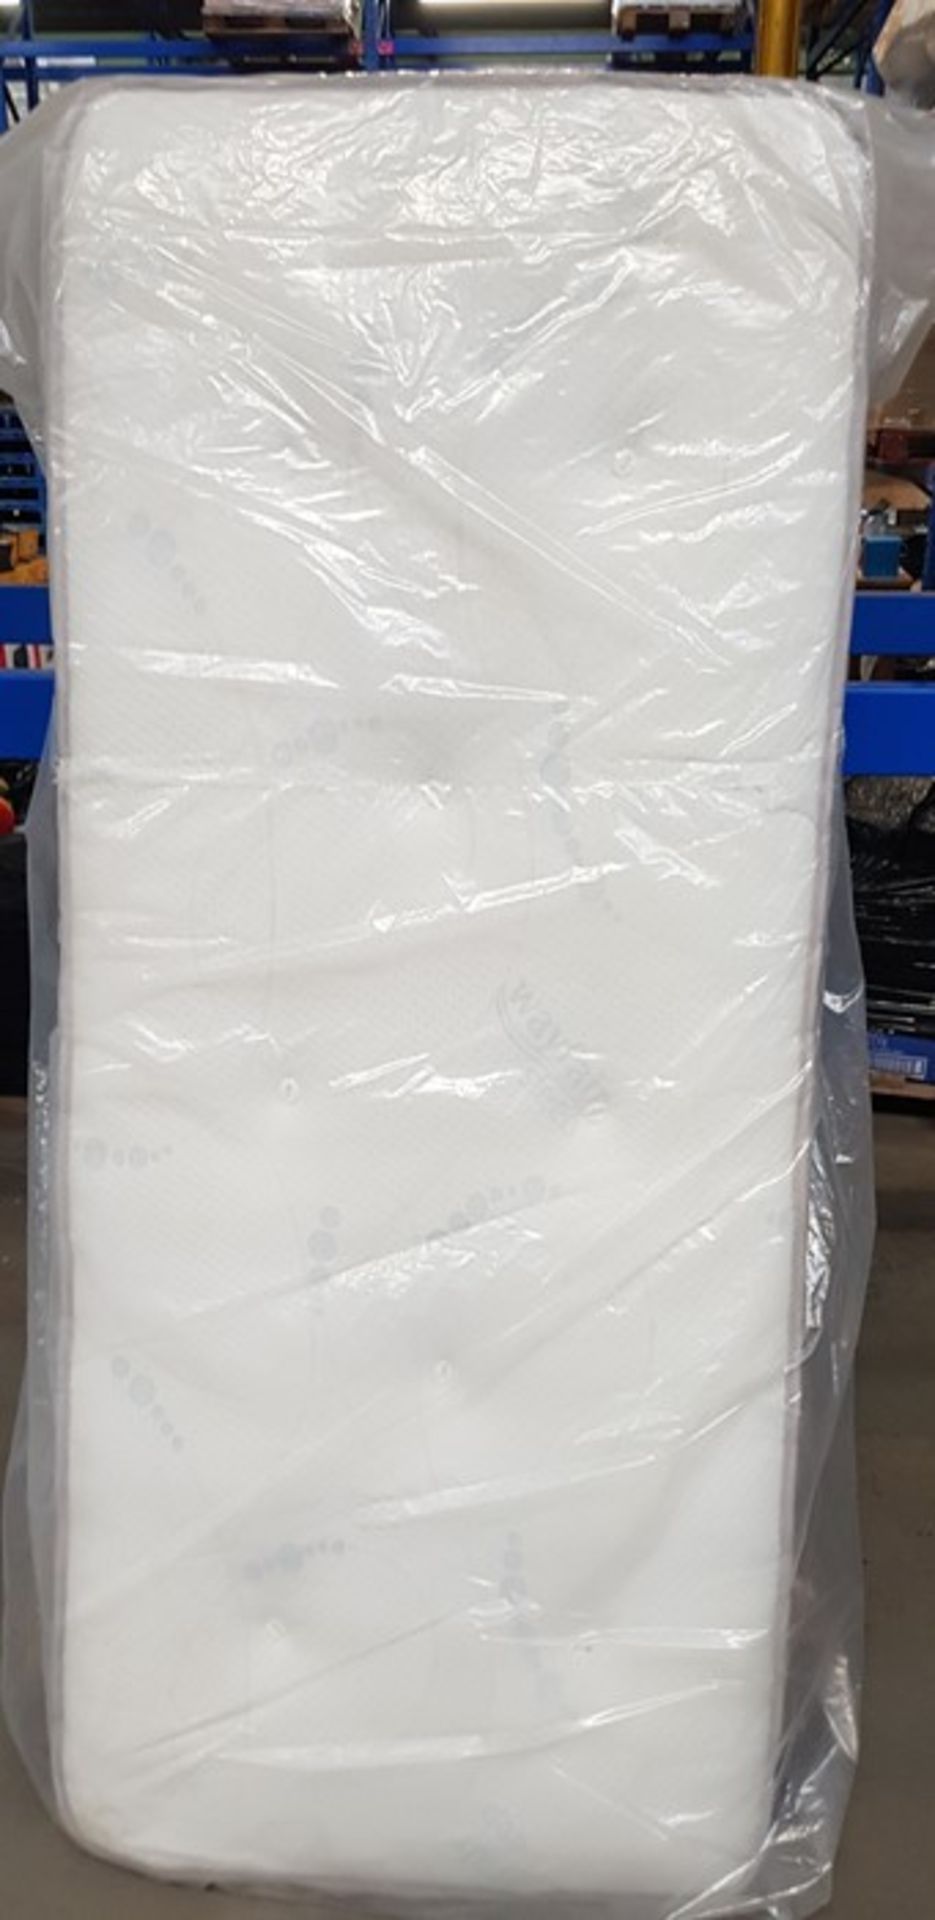 1 BAGGED 80CM SMALL SINGLE POCKET SPRUNG MATTRESS / NEEDS A CLEAN / RRP £159.95 (PUBLIC VIEWING